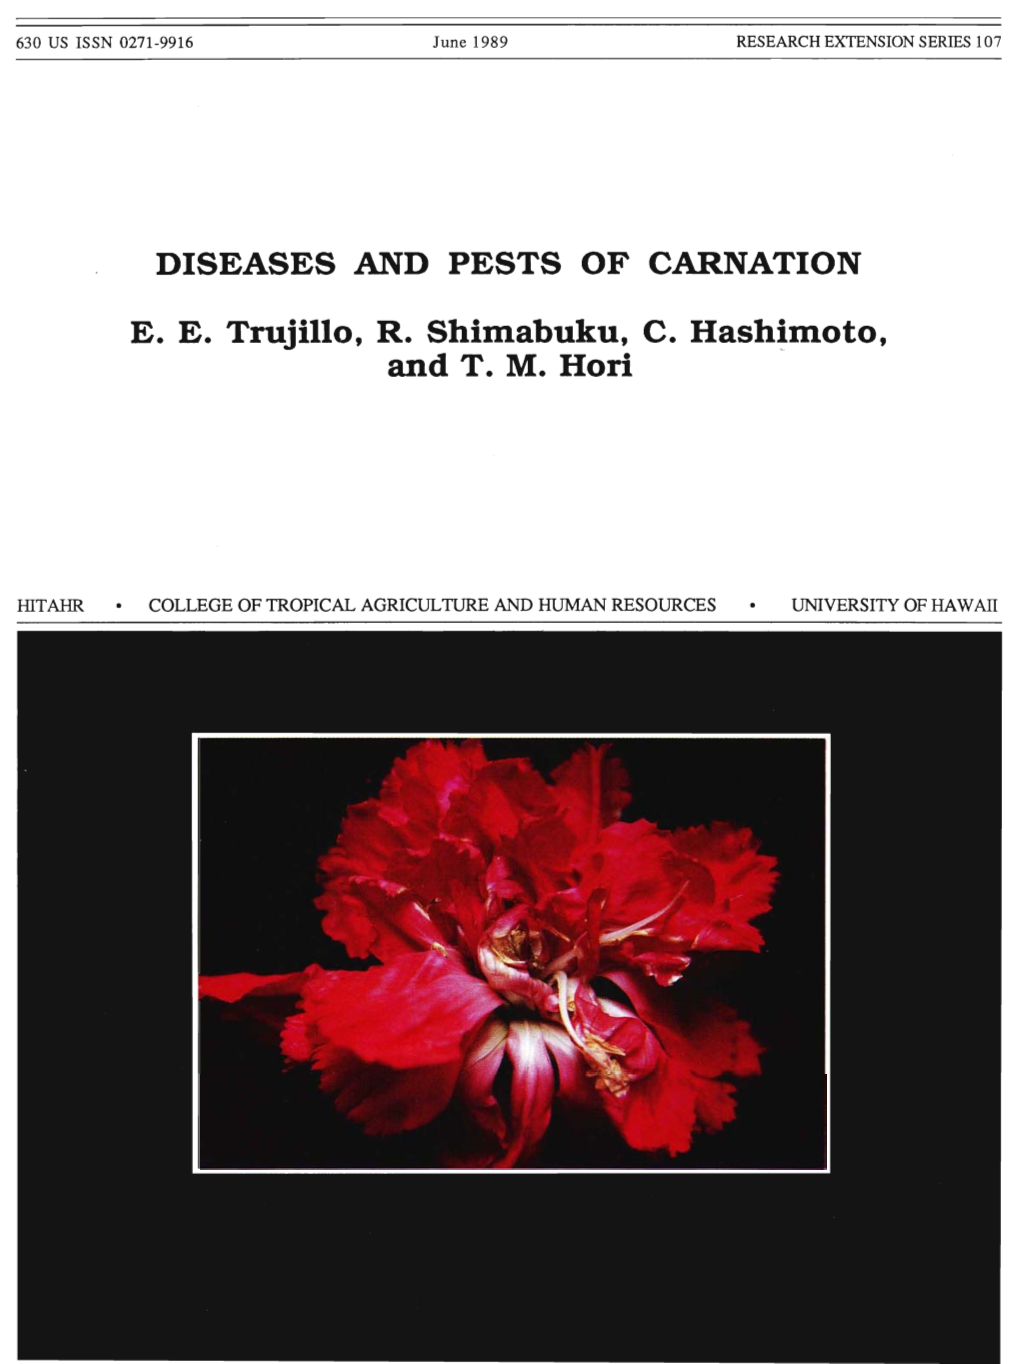 Diseases and Pests of Carnation